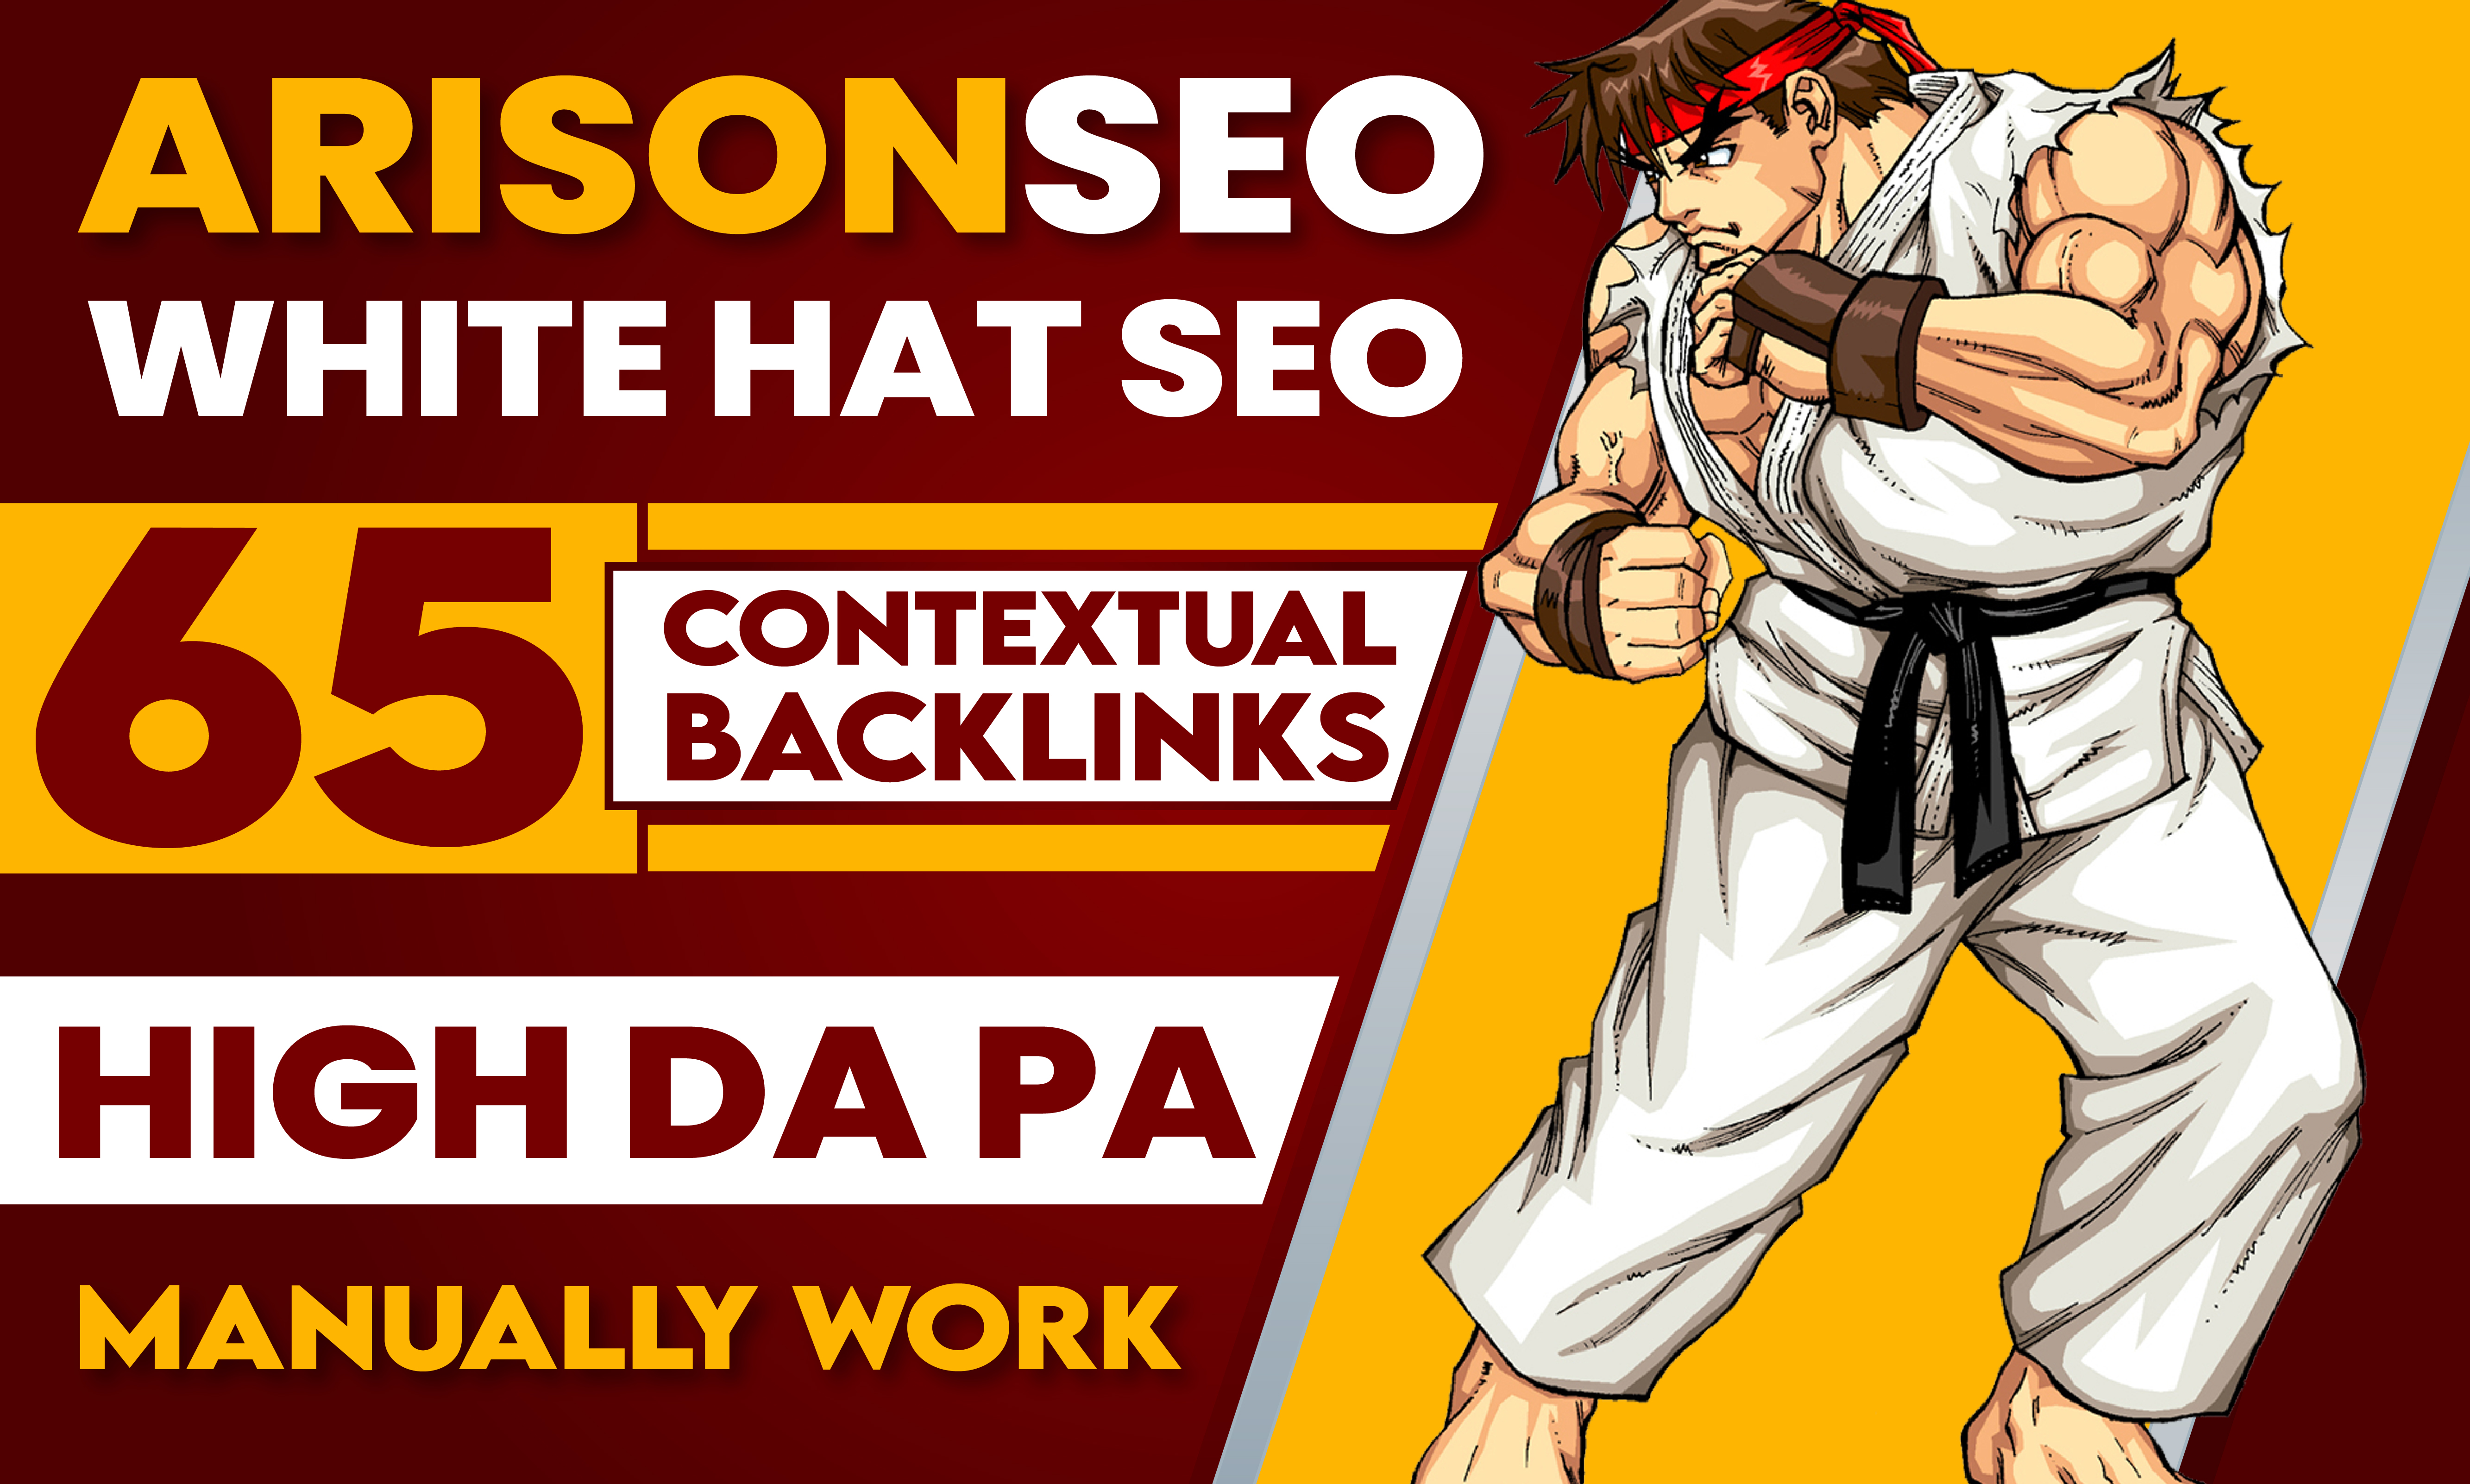 Supercharge Your SEO: 65 Manual Contextual Backlinks with High DA PA